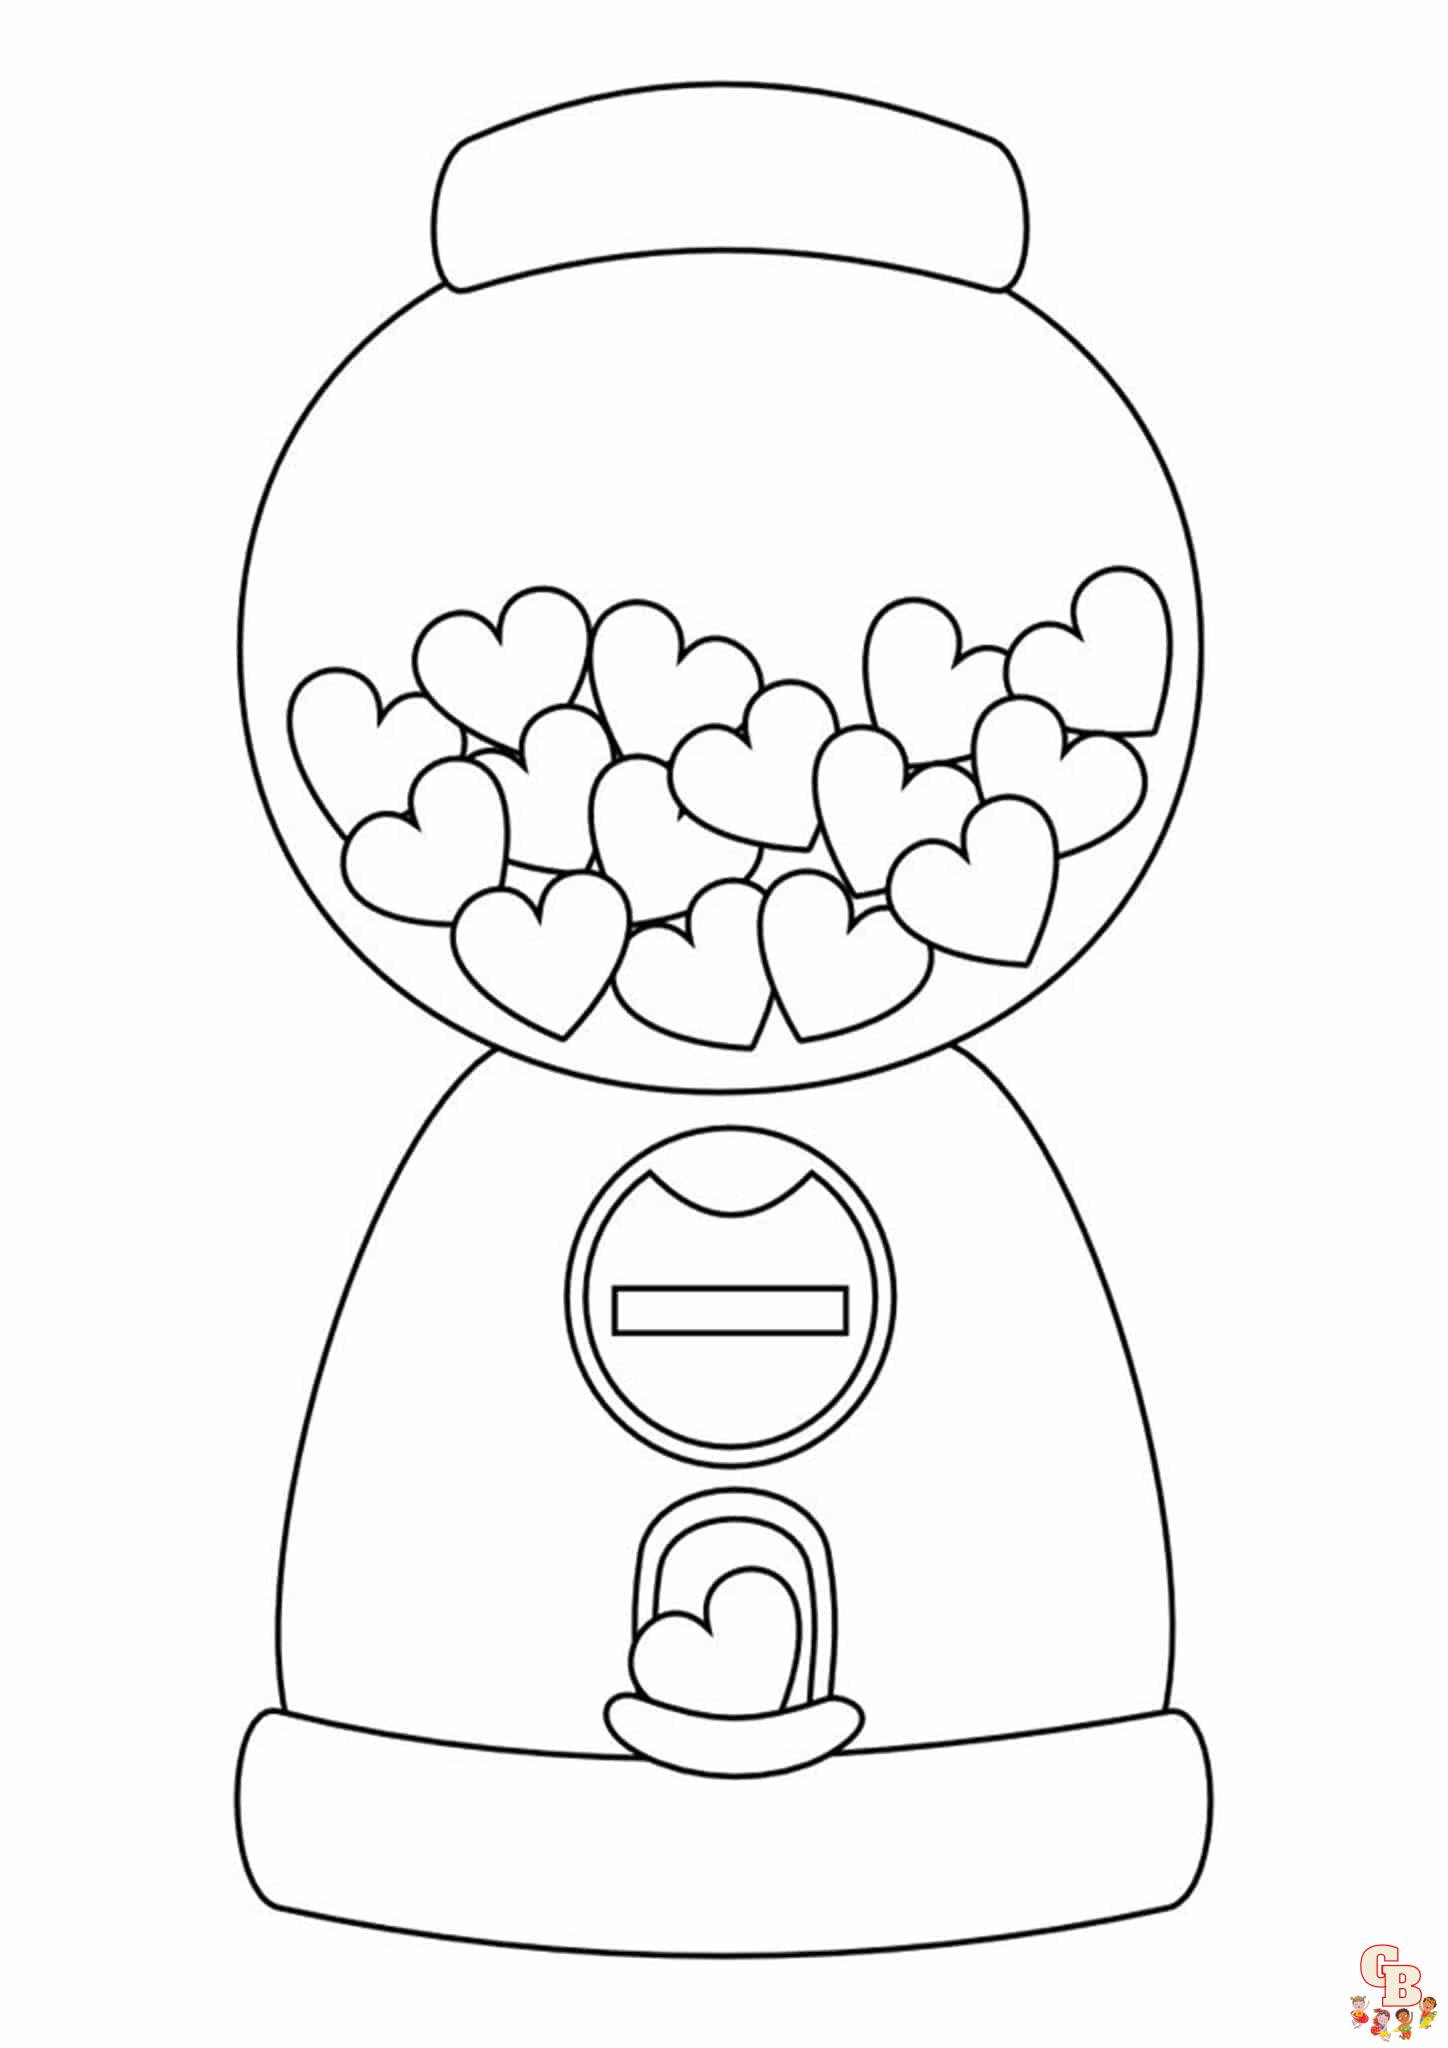 Easy Cute Coloring Pages